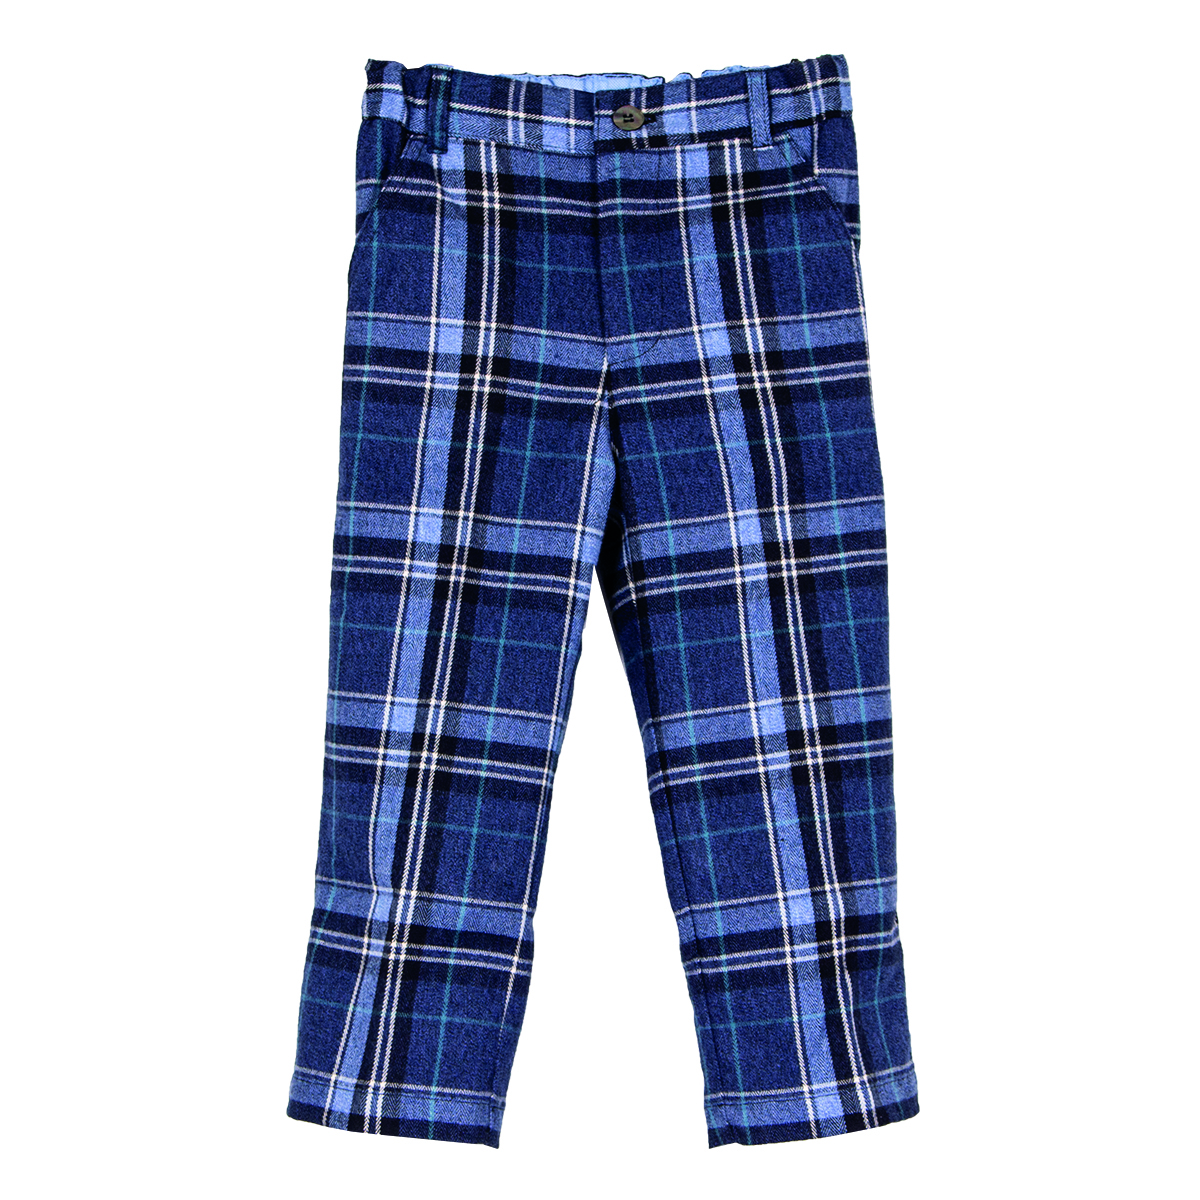 Siola Kids' Blue Checked Trousers